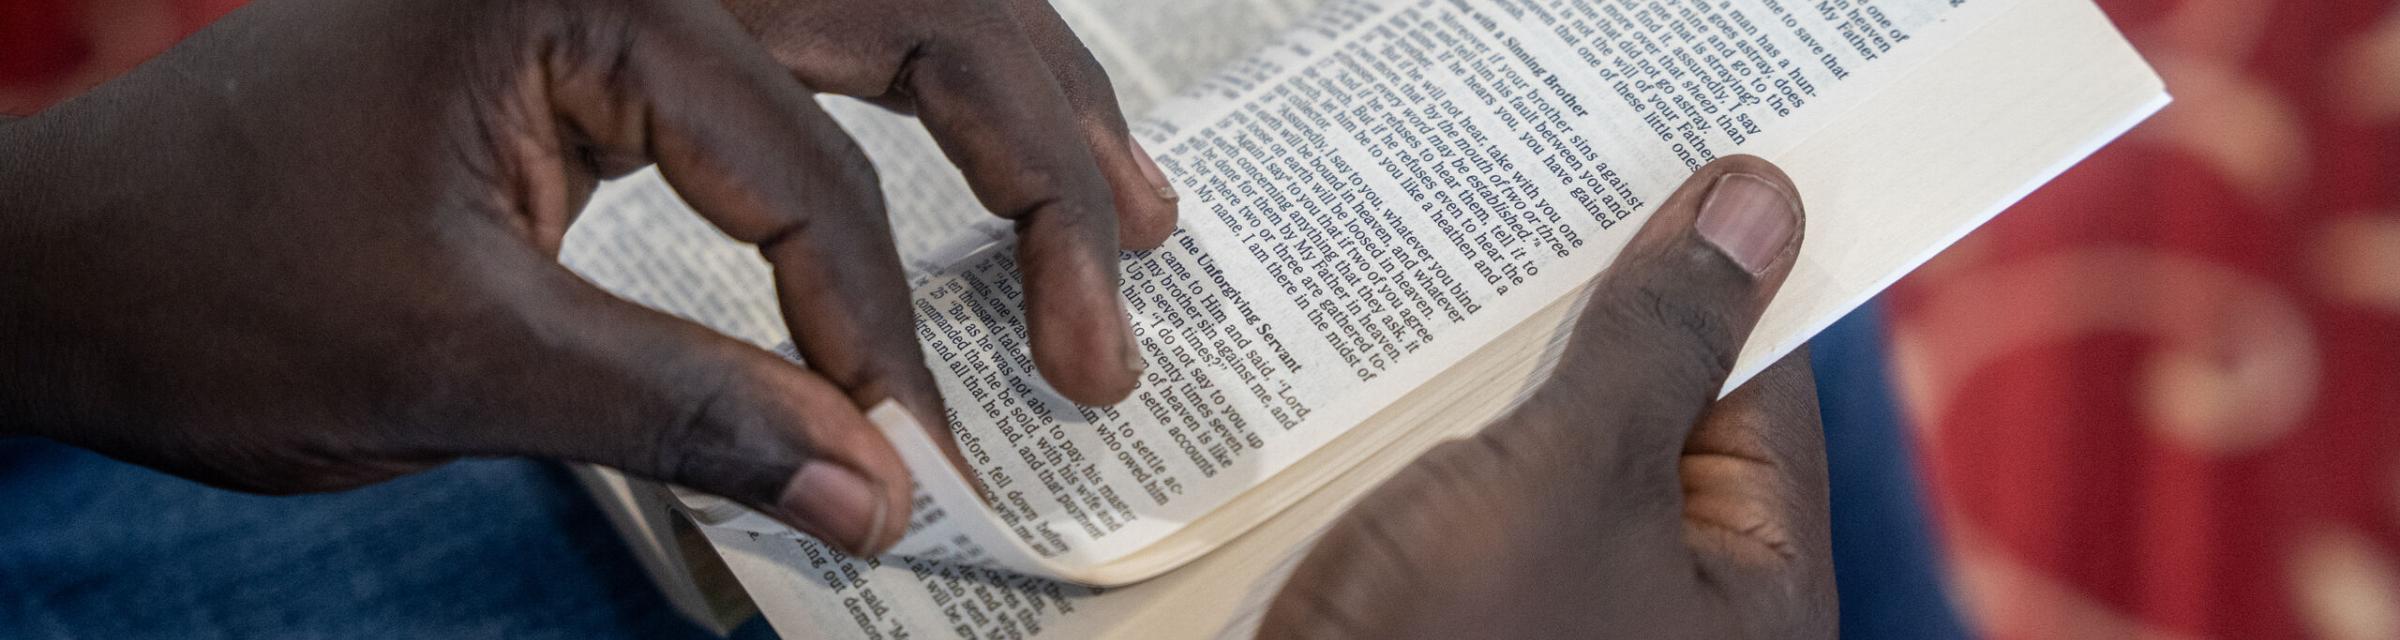 A man flips through the Bible. Photo by RJ Rempel.